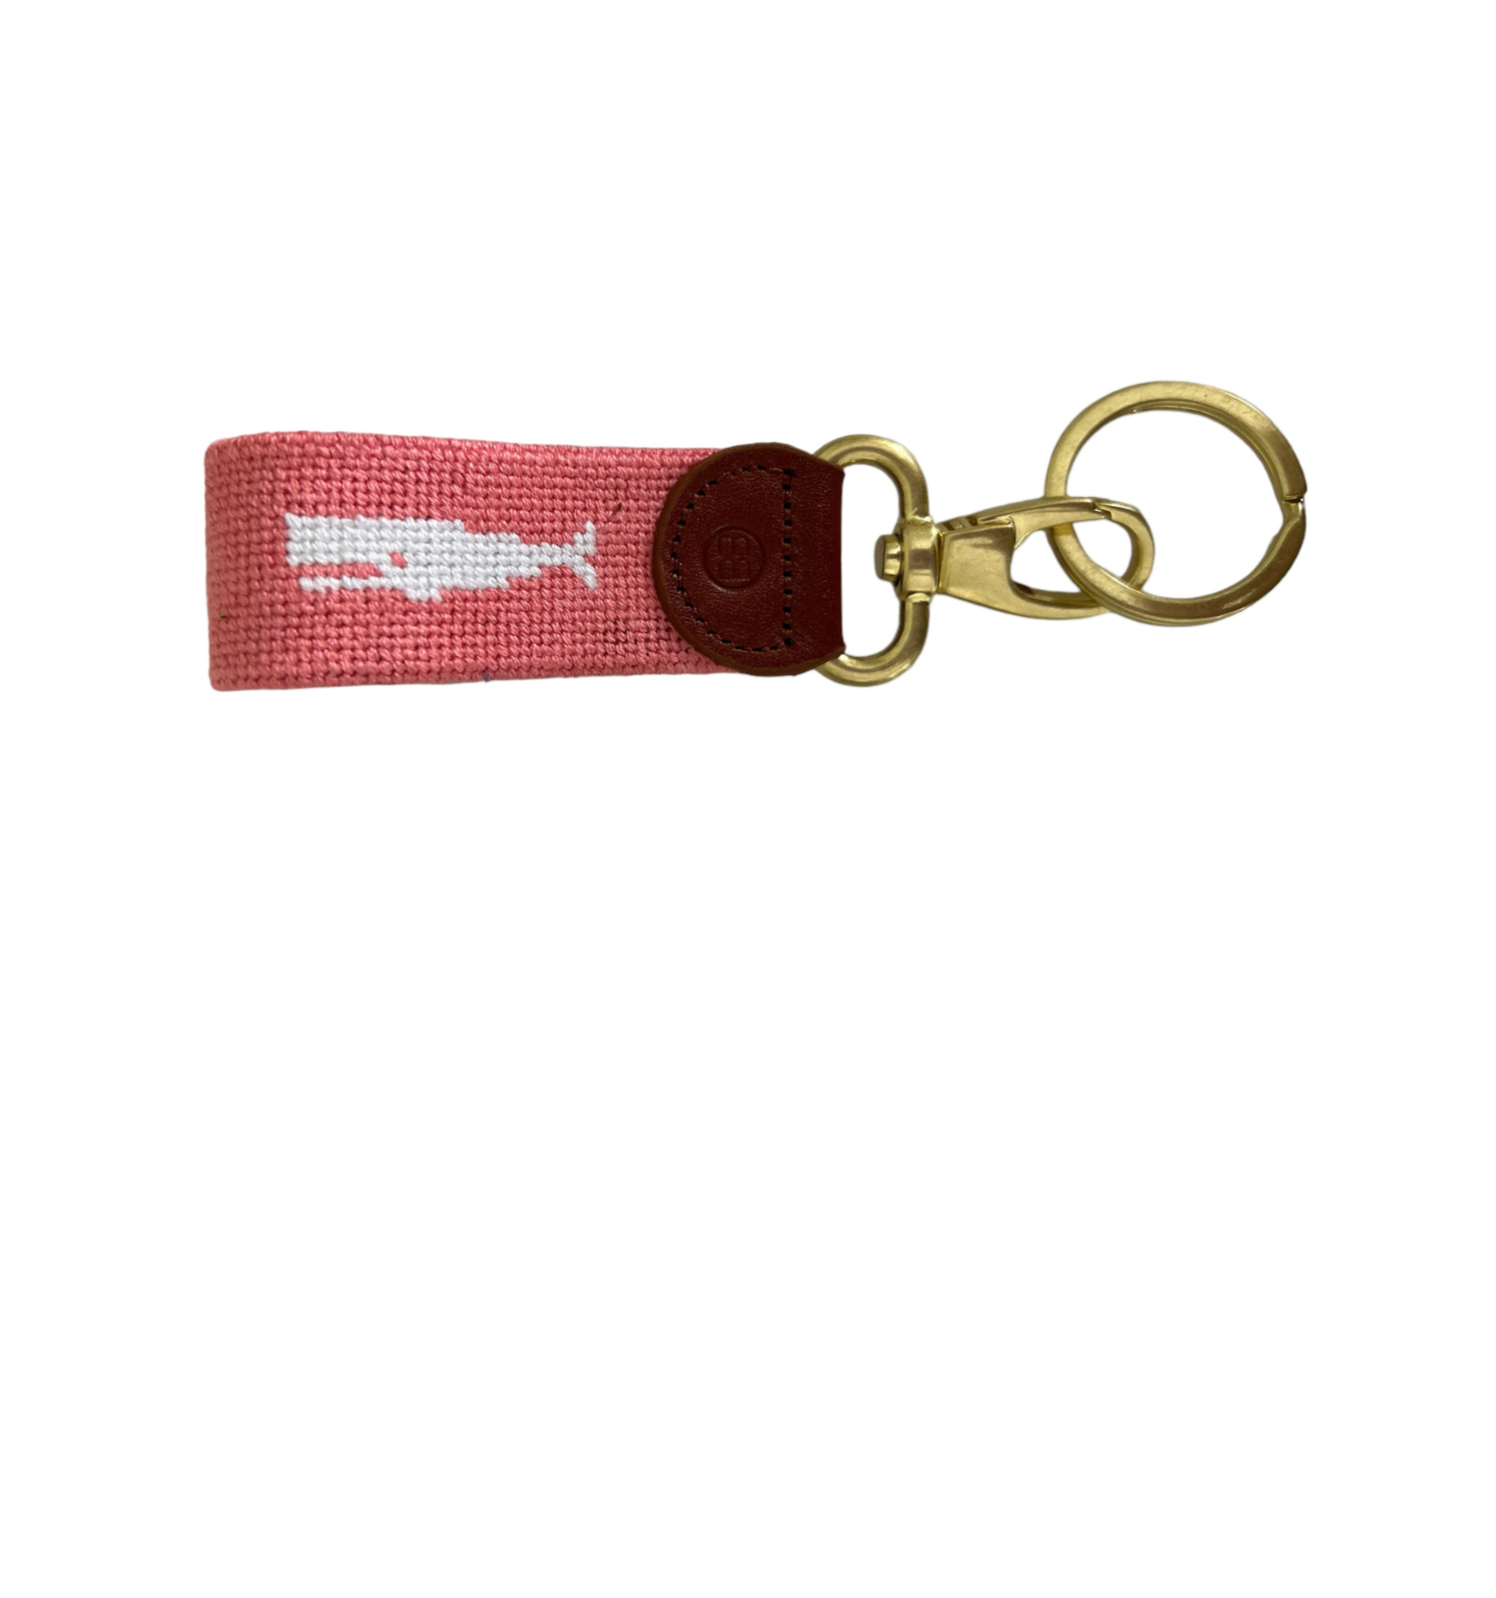 Needlepoint Key Fob , Pink whale design, brass lobster clasp